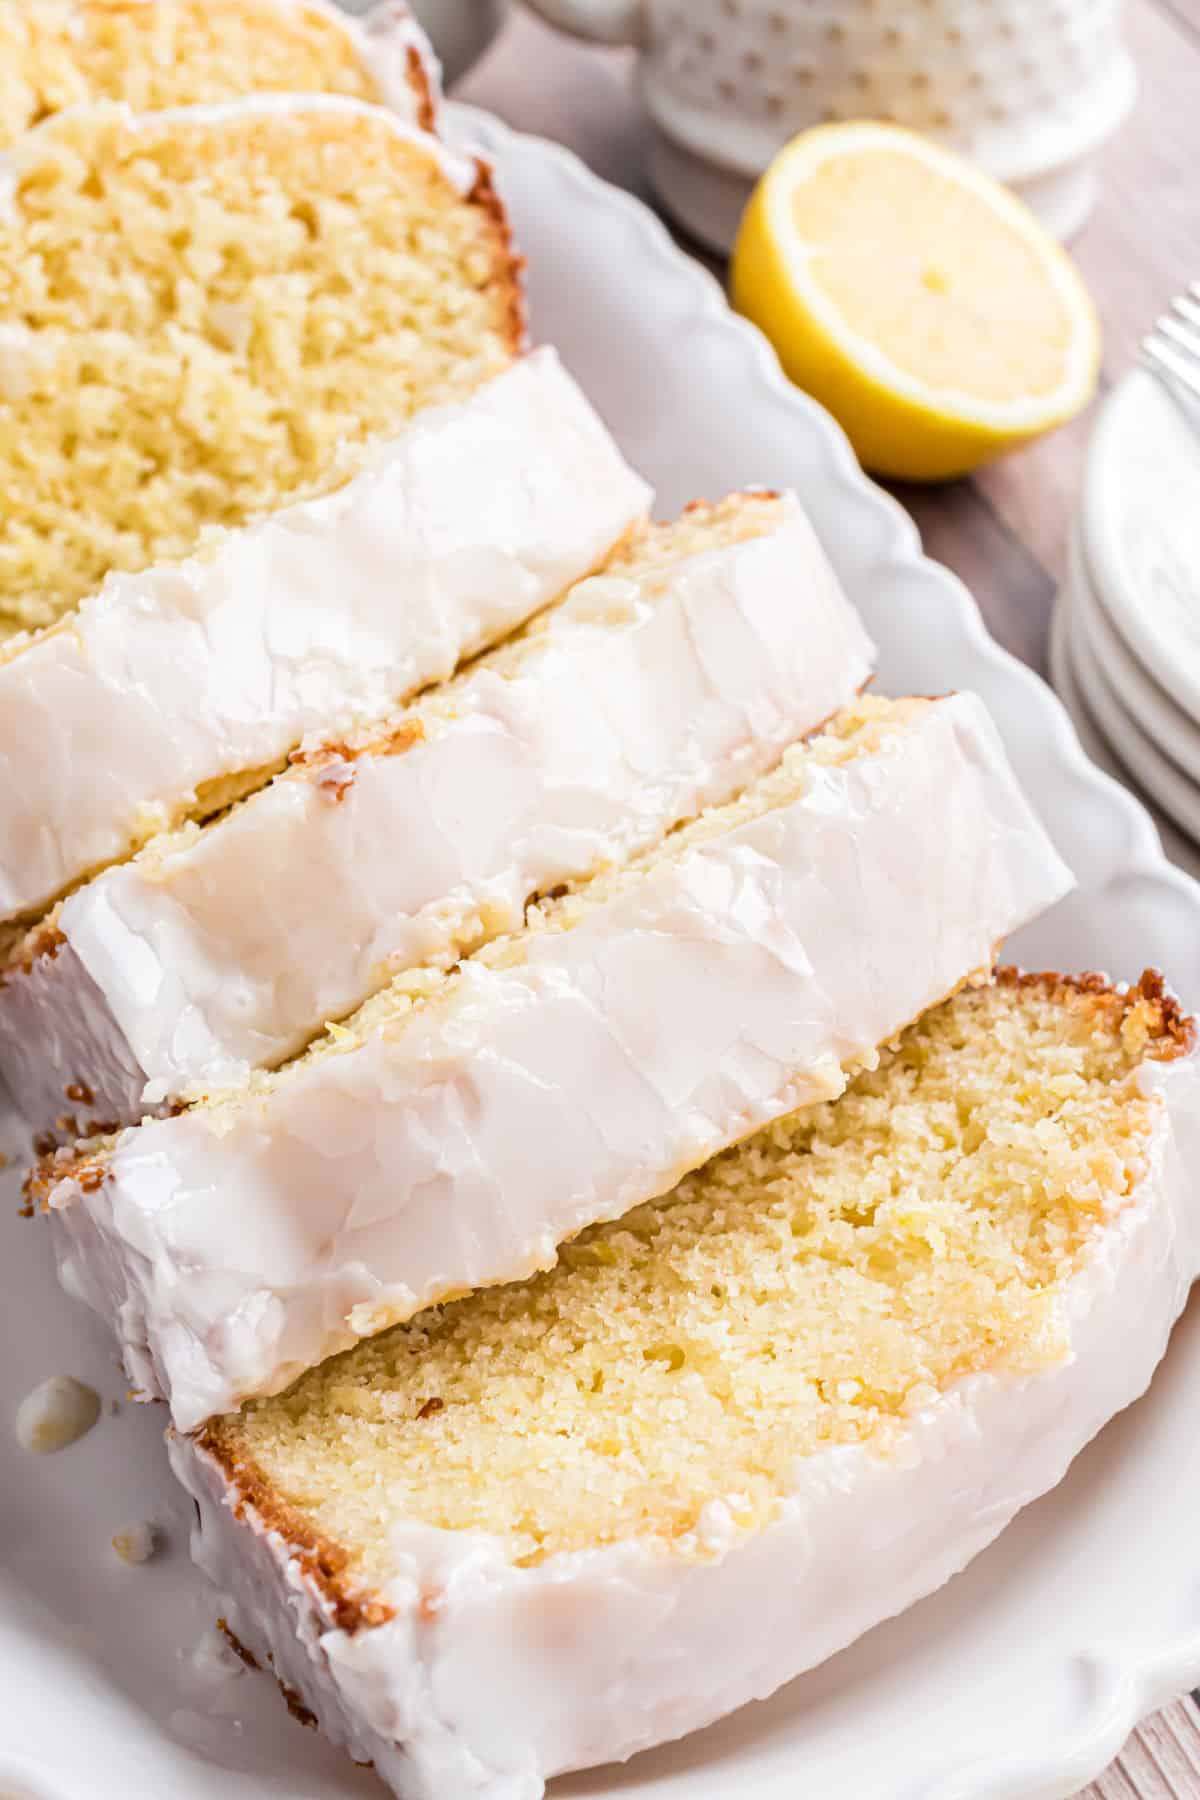 Loaf of lemon bread with icing sliced on a white serving plate.